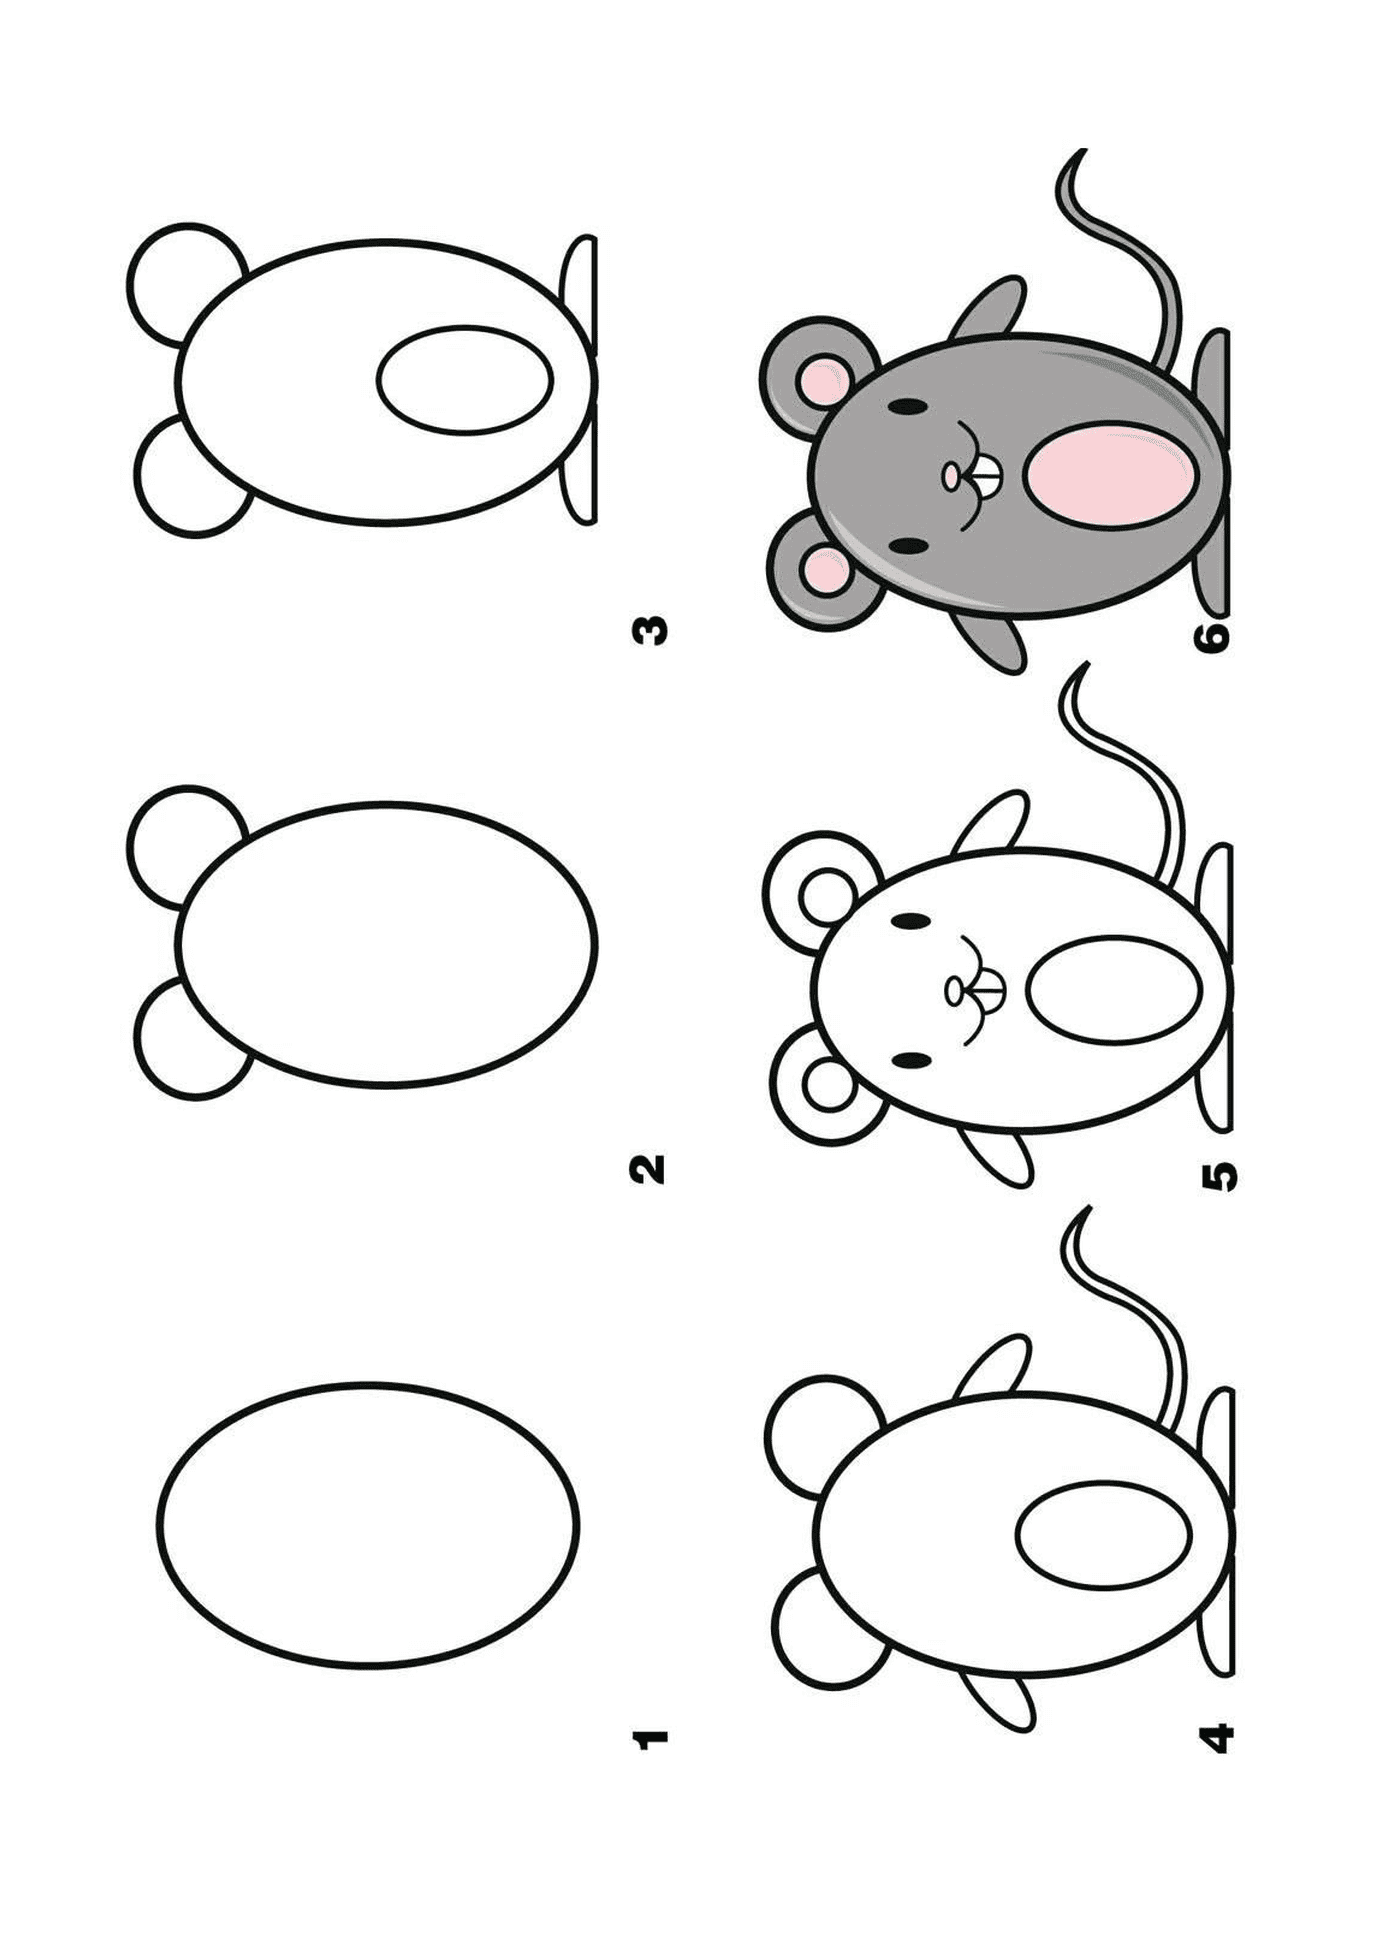  How to draw a mouse step by step 